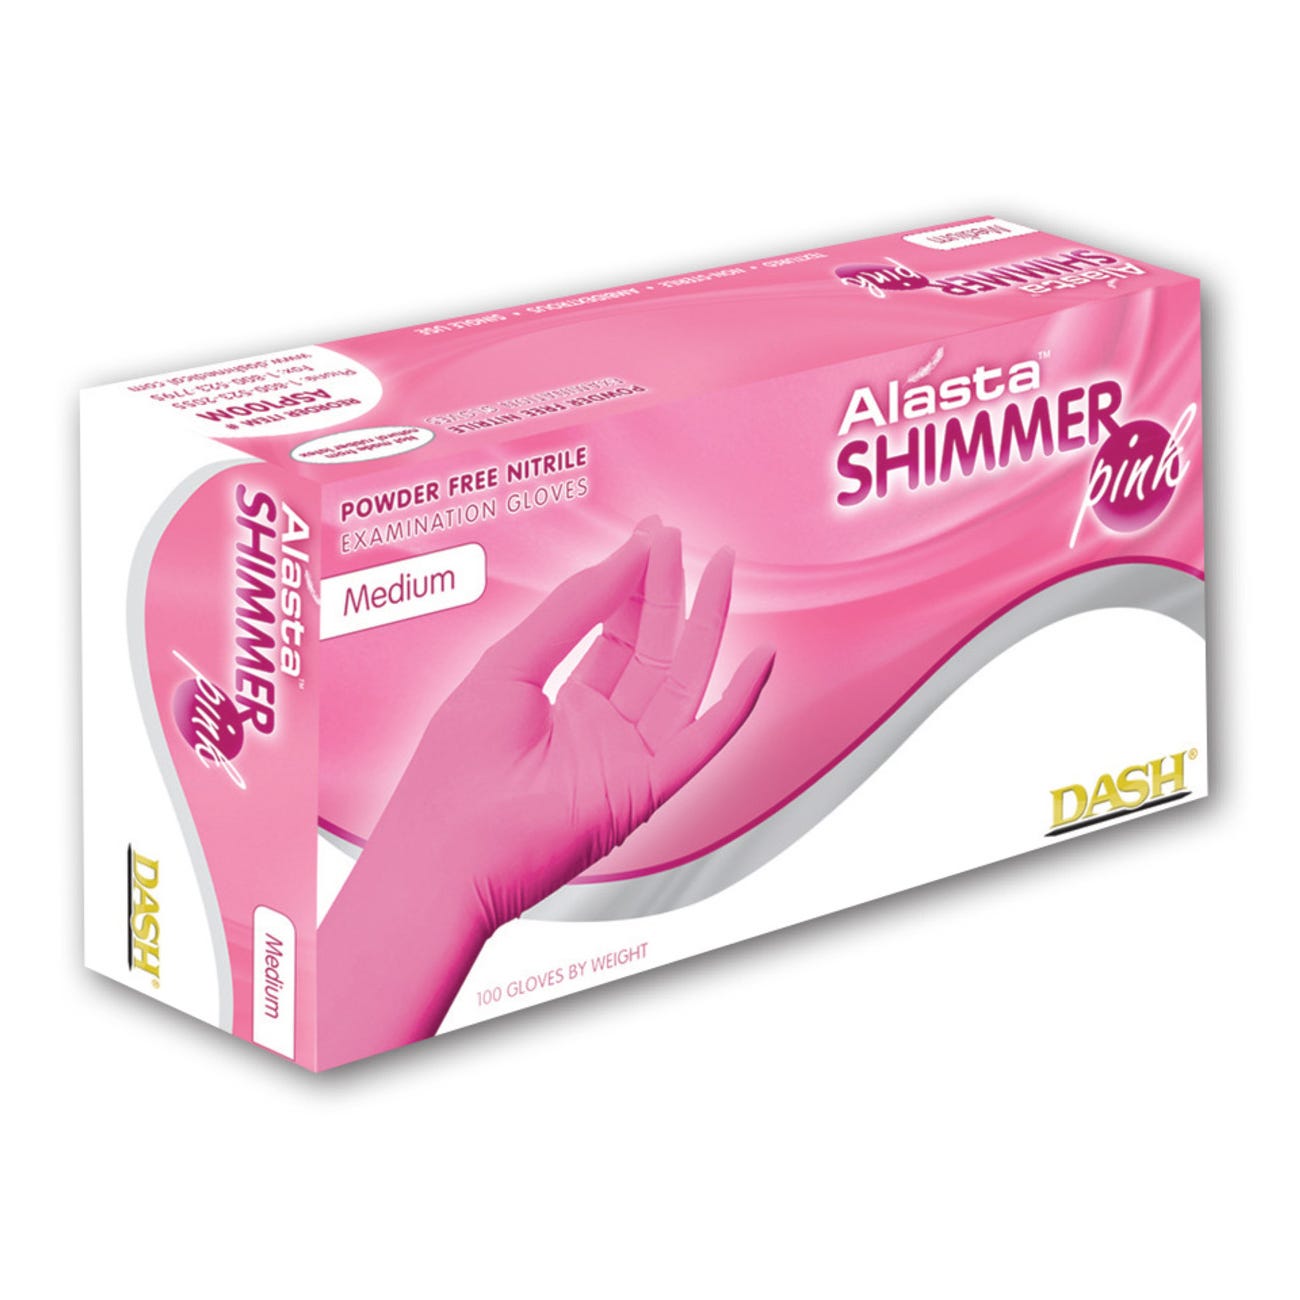 Alasta™ Shimmer Pink Nitrile Exam Gloves, Small, - 100/Box, 10 Boxes/Case